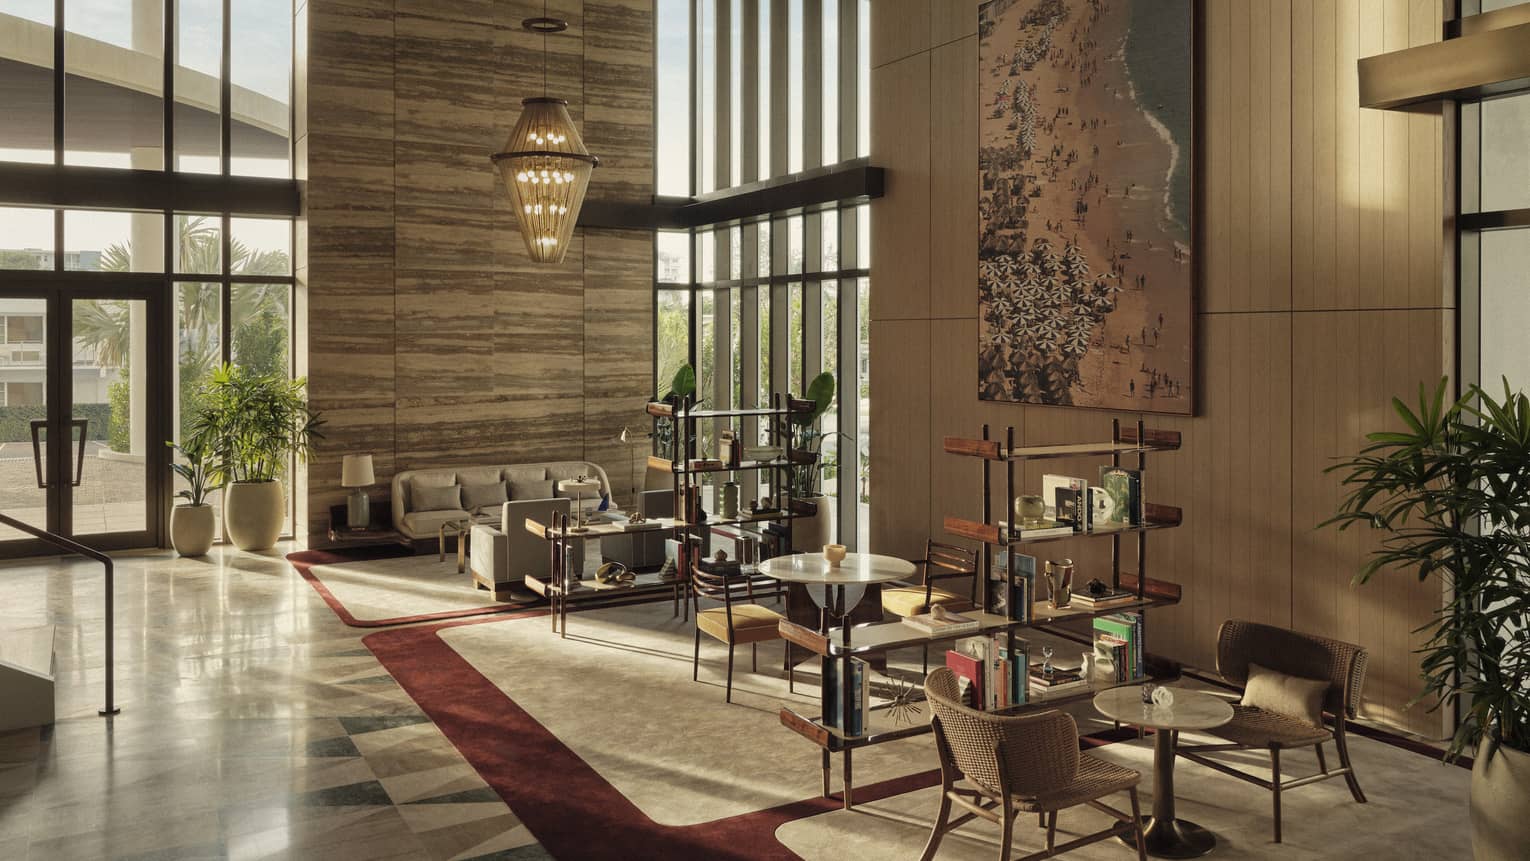 A lobby seating area with various chairs and sofa, as well as bookshelves and art.